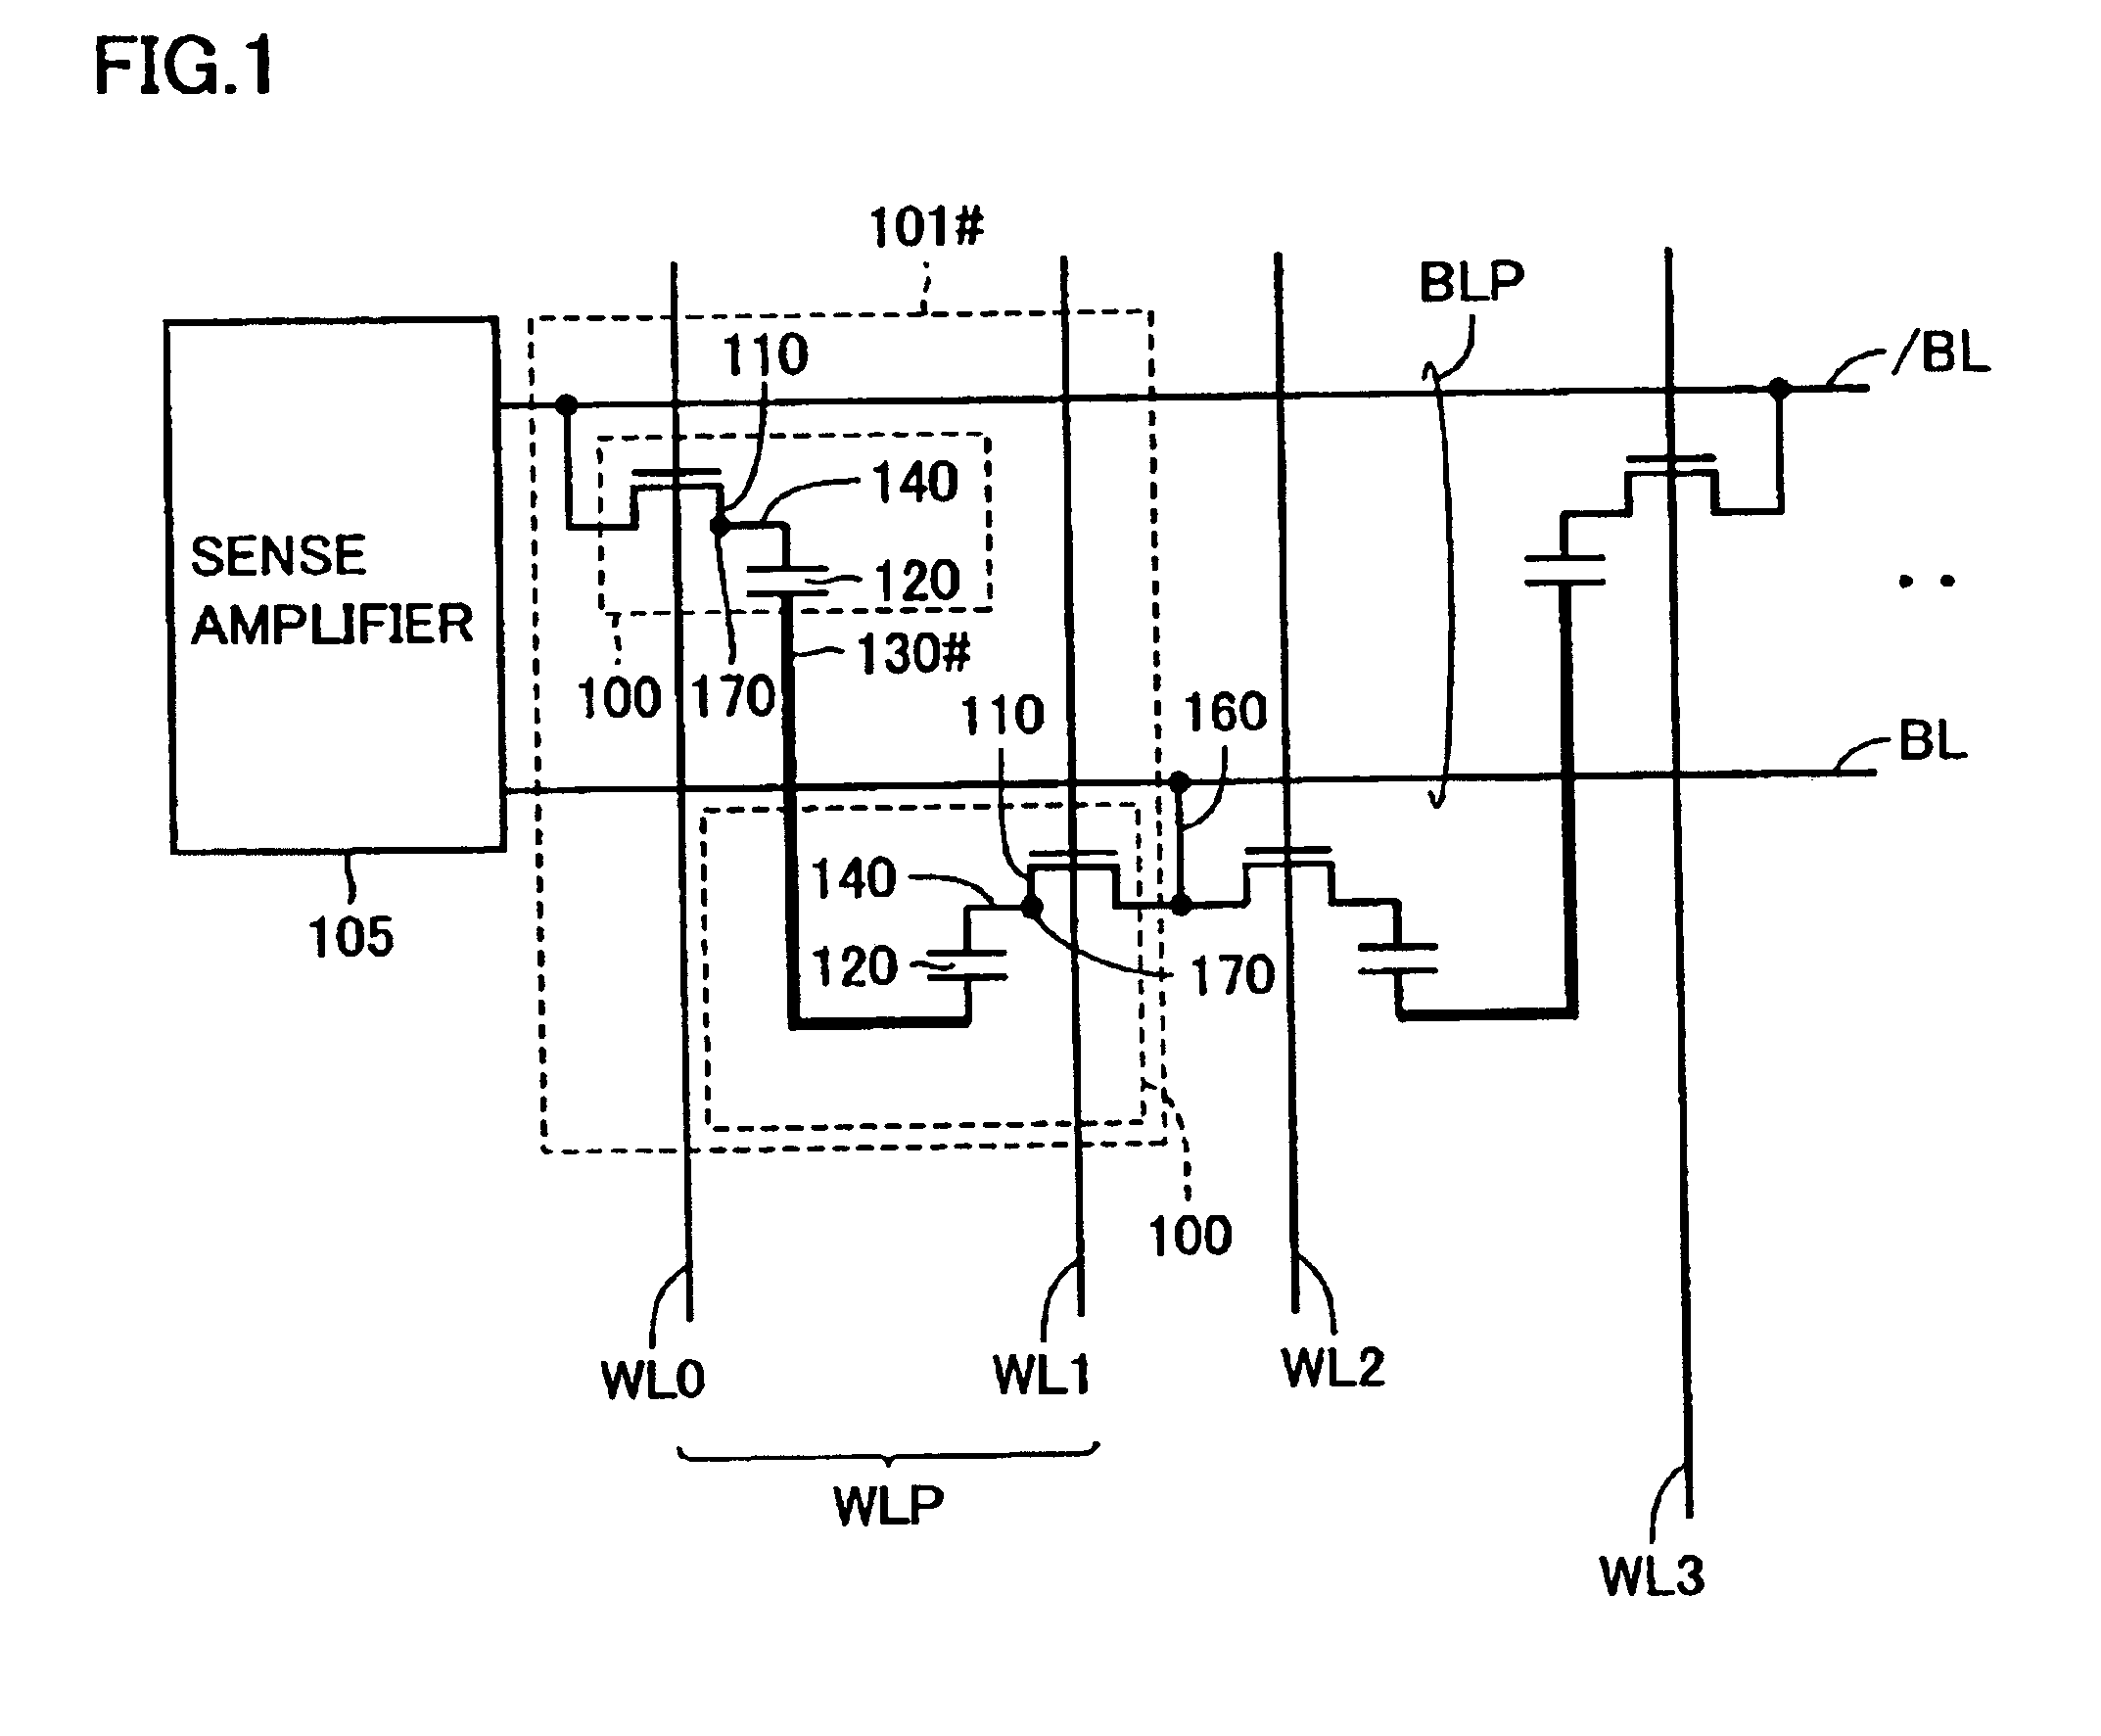 Semiconductor memory device having twin-cell units